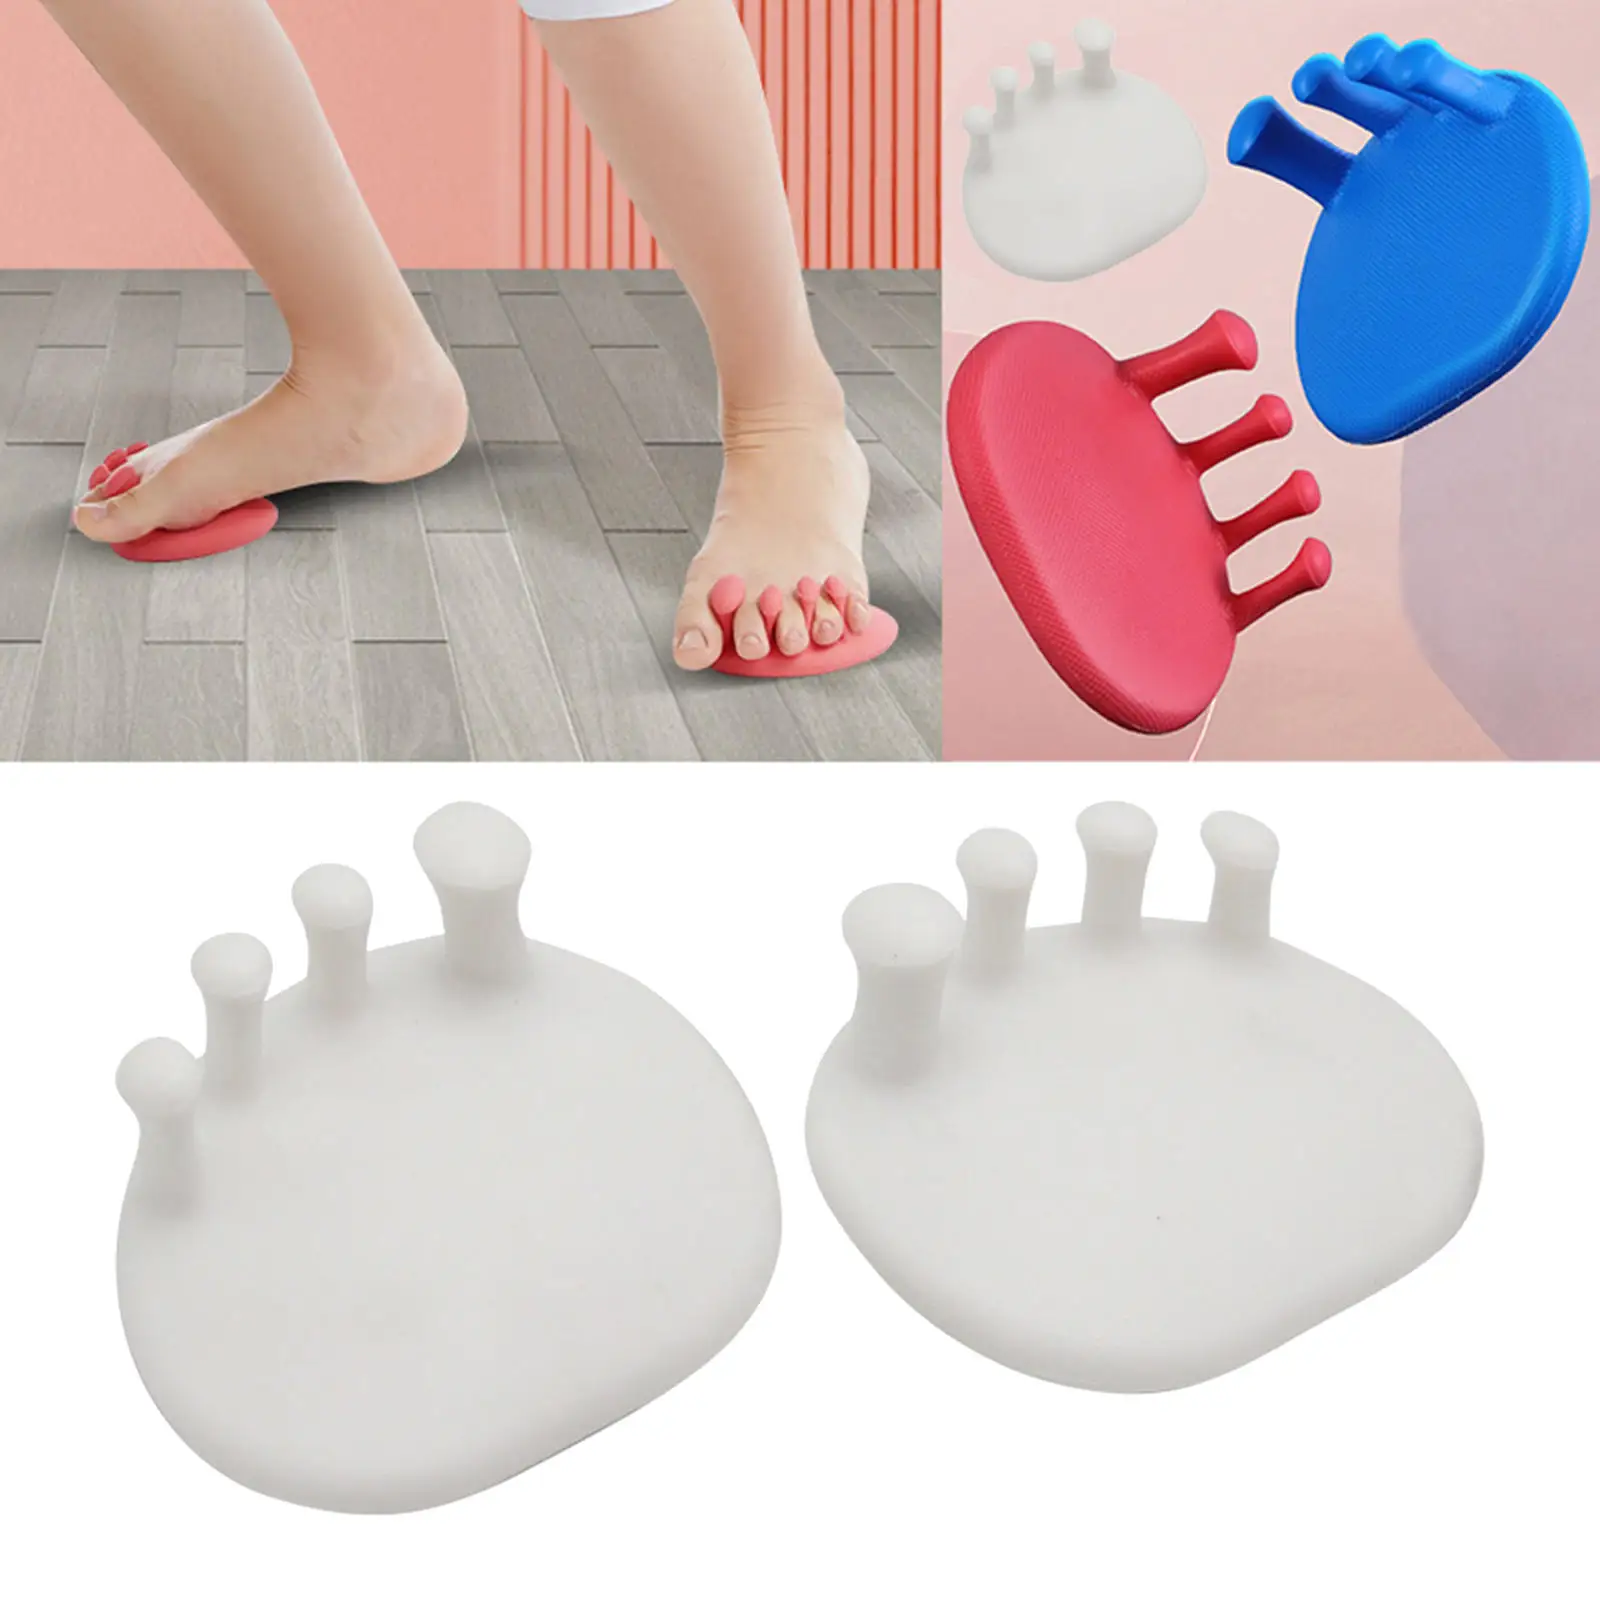 1 Pair Bunion Corrector Toes Spacer, Universal Size, for Correct Bunions Overlapping Toes Men Women